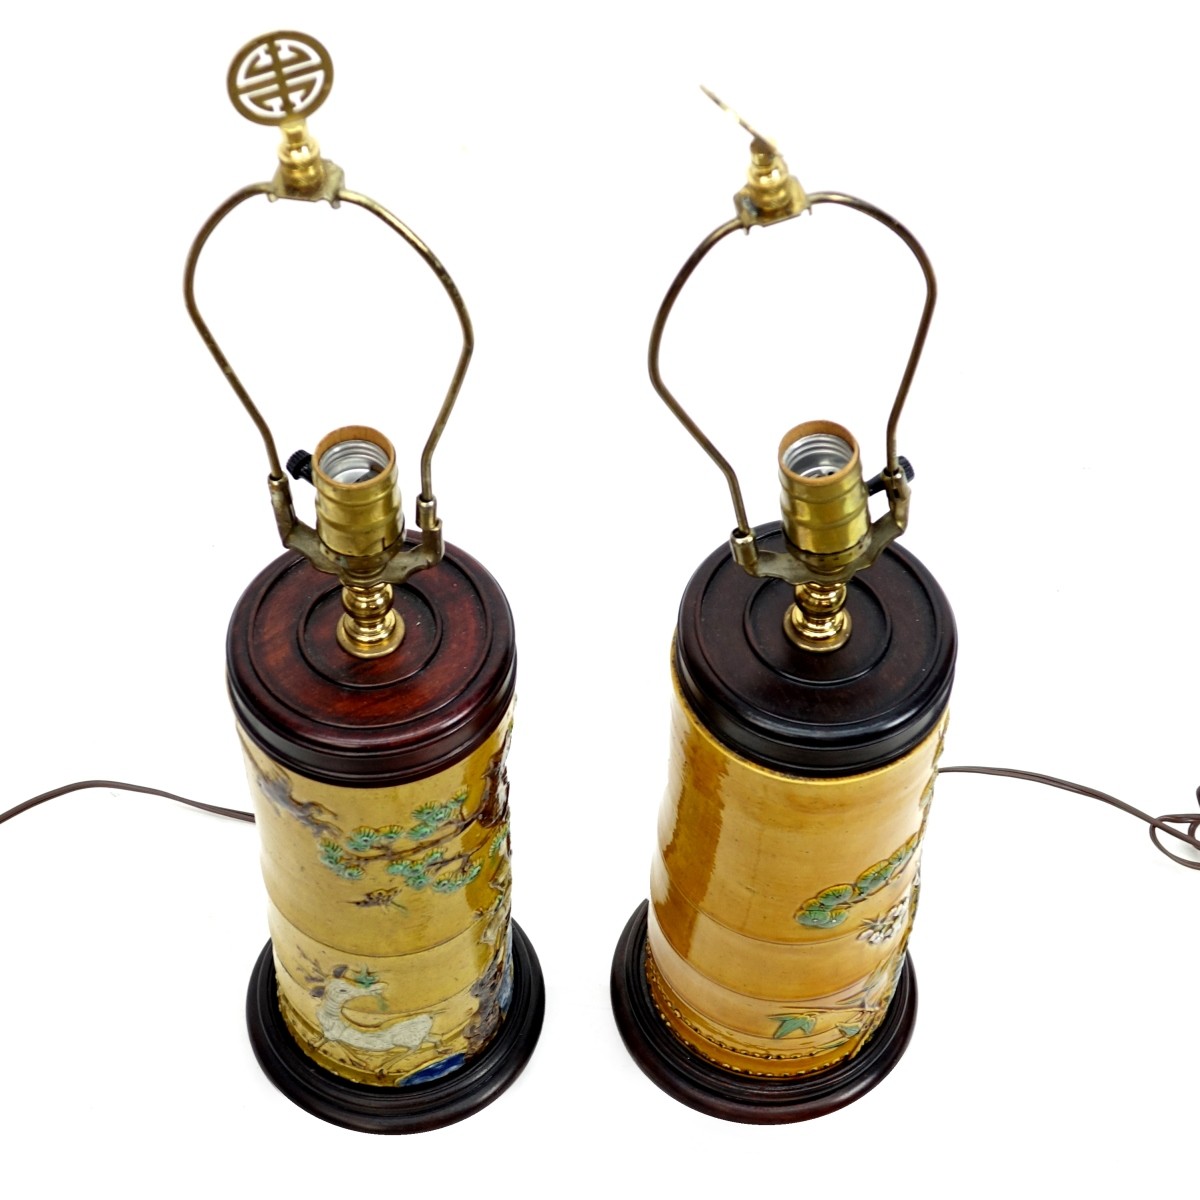 Pair of Modern Chinese Porcelain Lamps